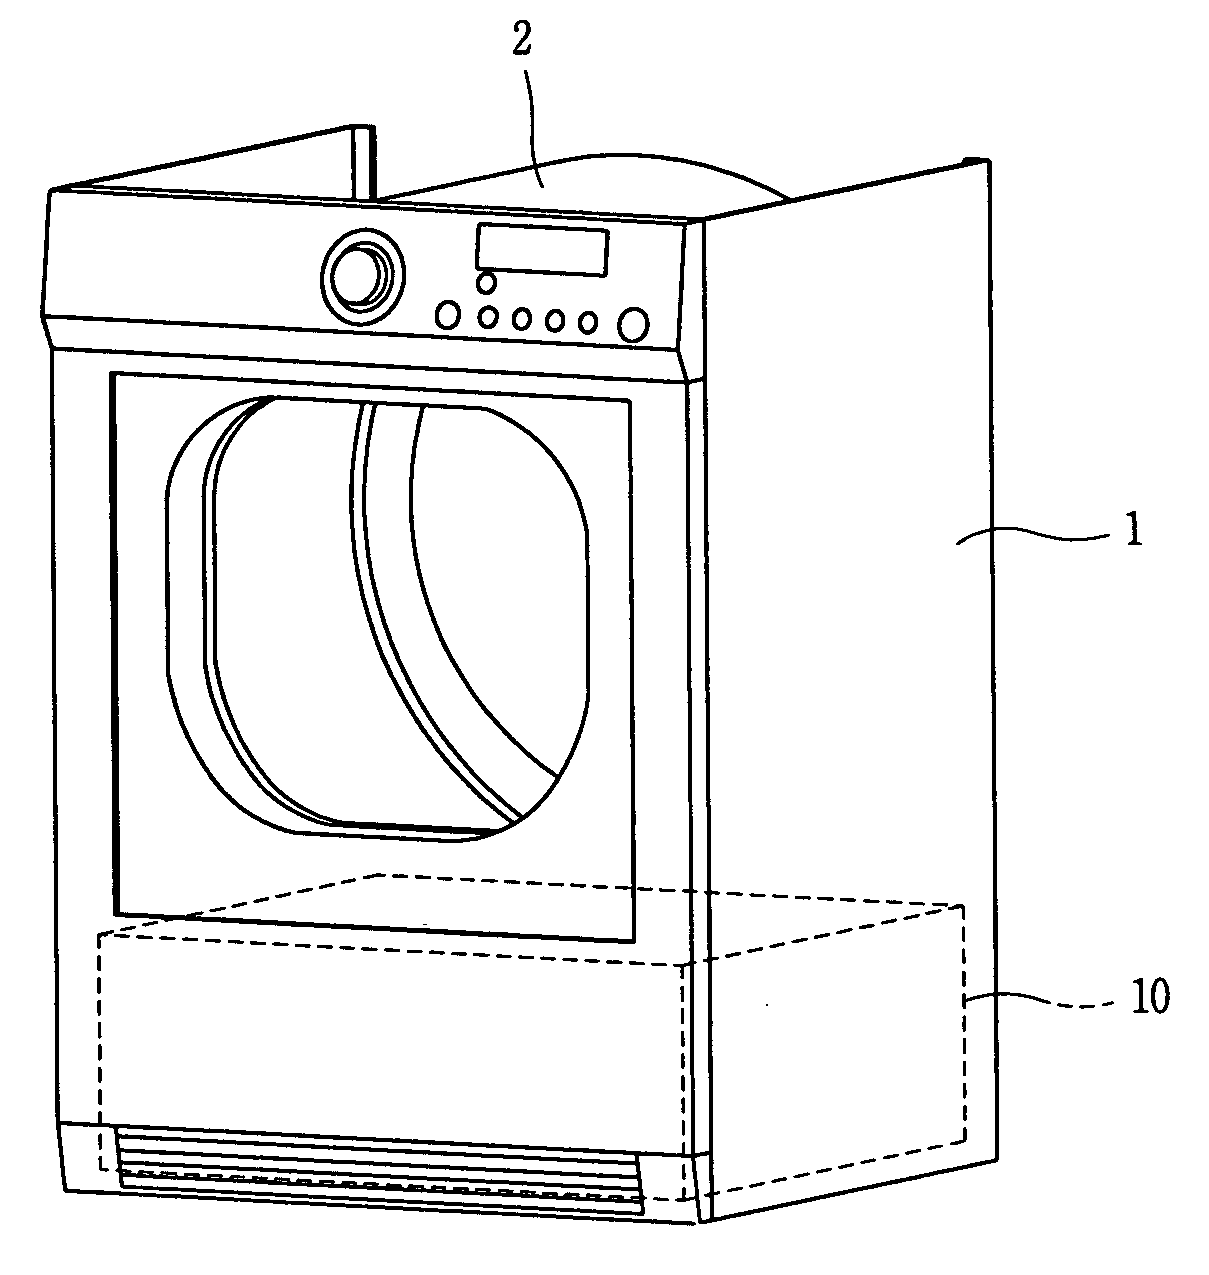 Apparatus for suctioning external air of clothes dryer